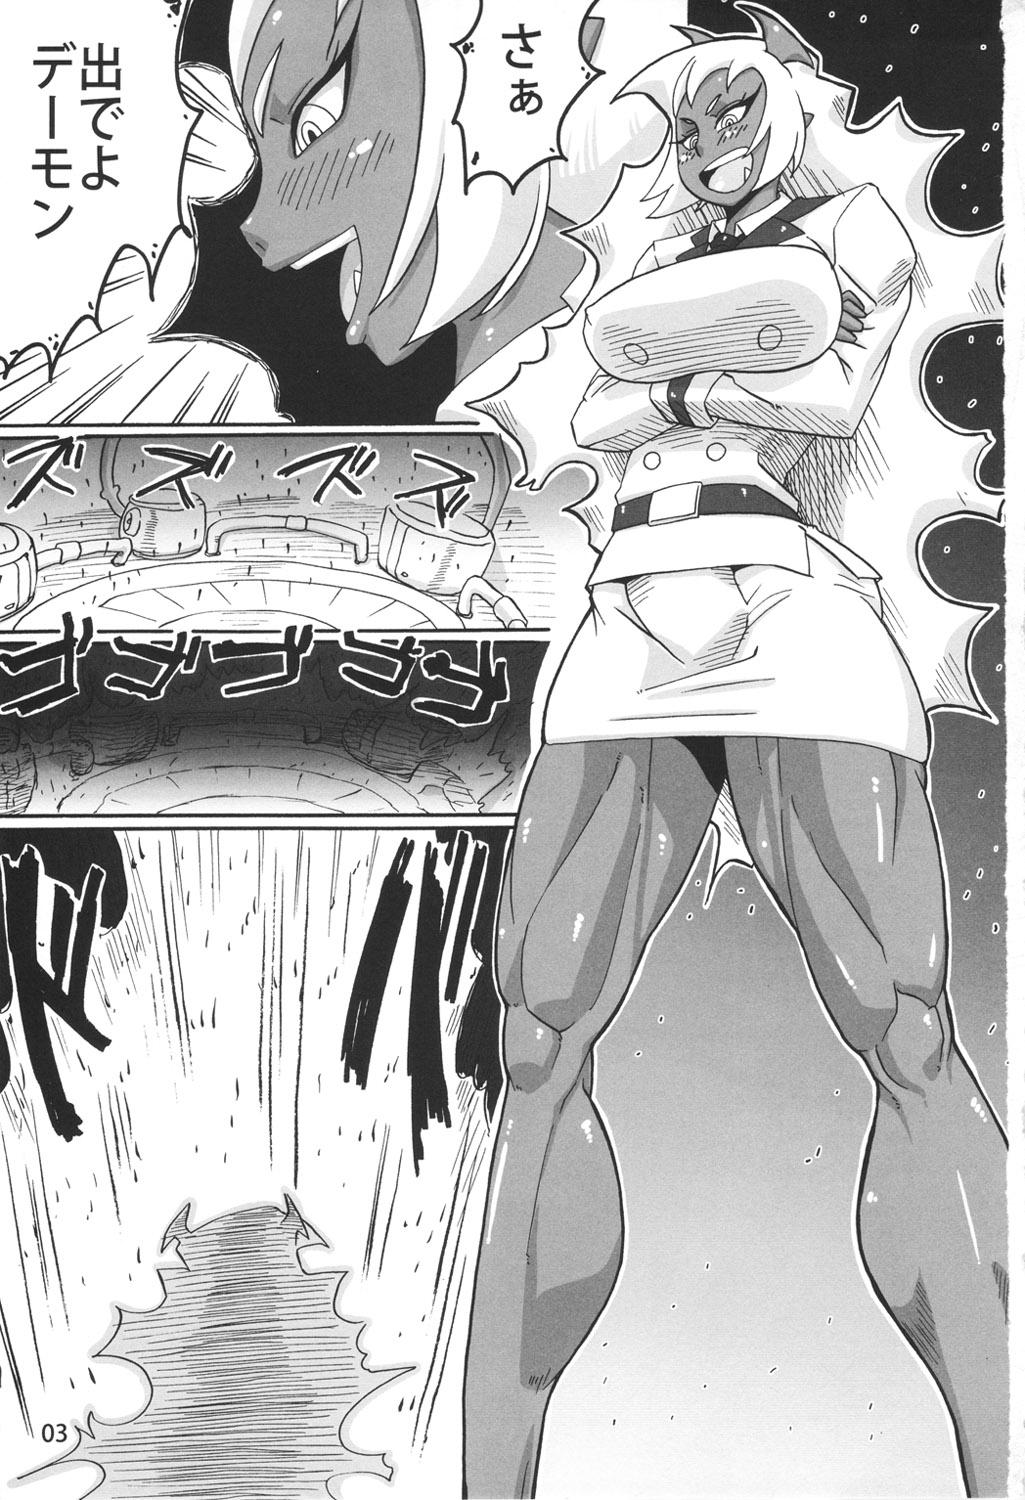 Gang Red Temptation - Panty and stocking with garterbelt Live - Page 2